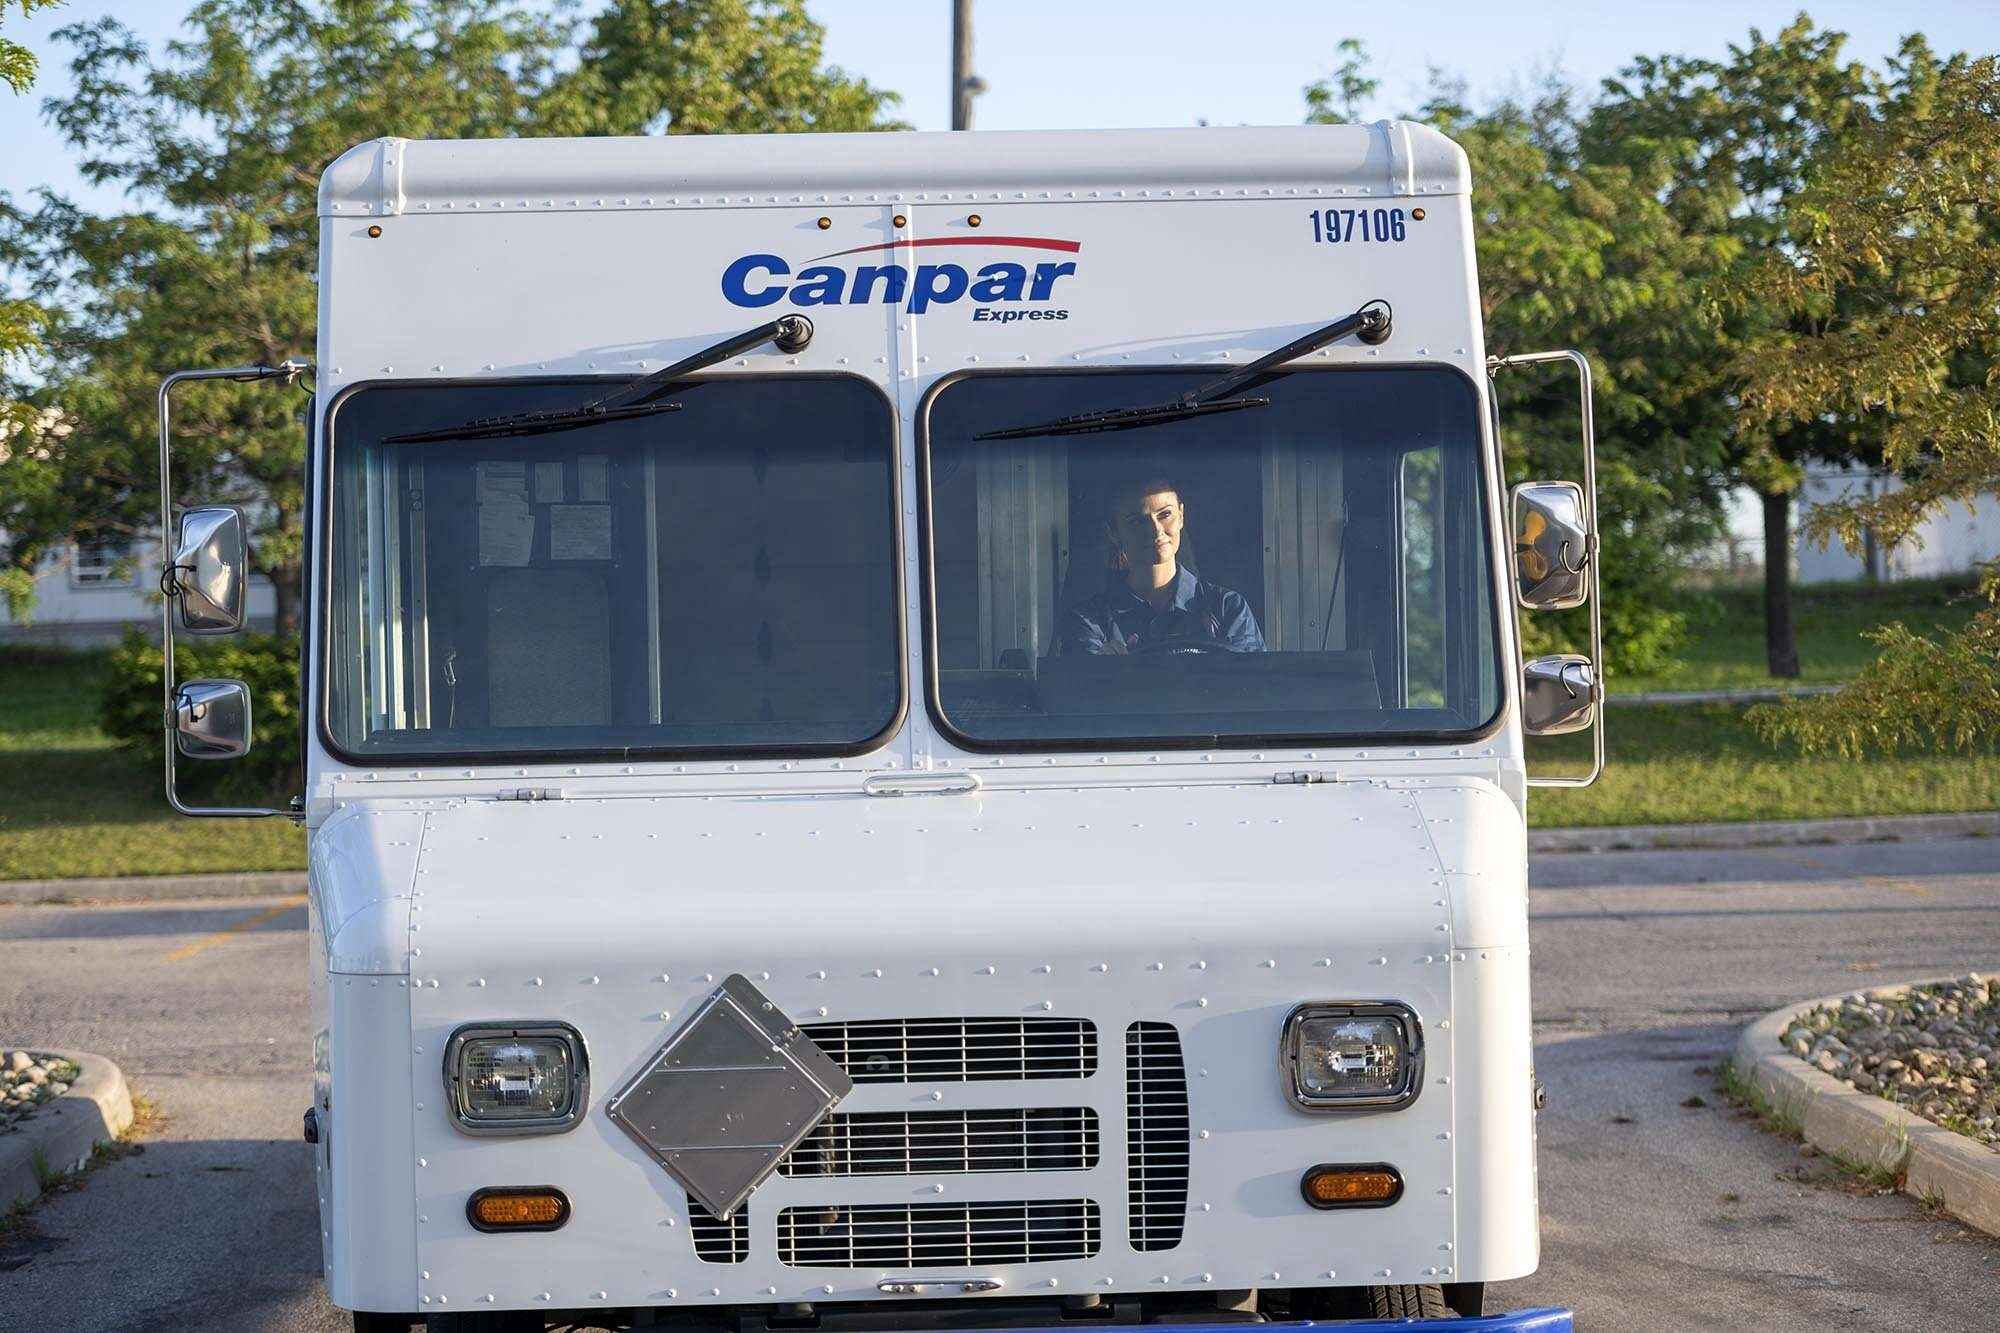 Canpar: commercial photography for a large logistics company